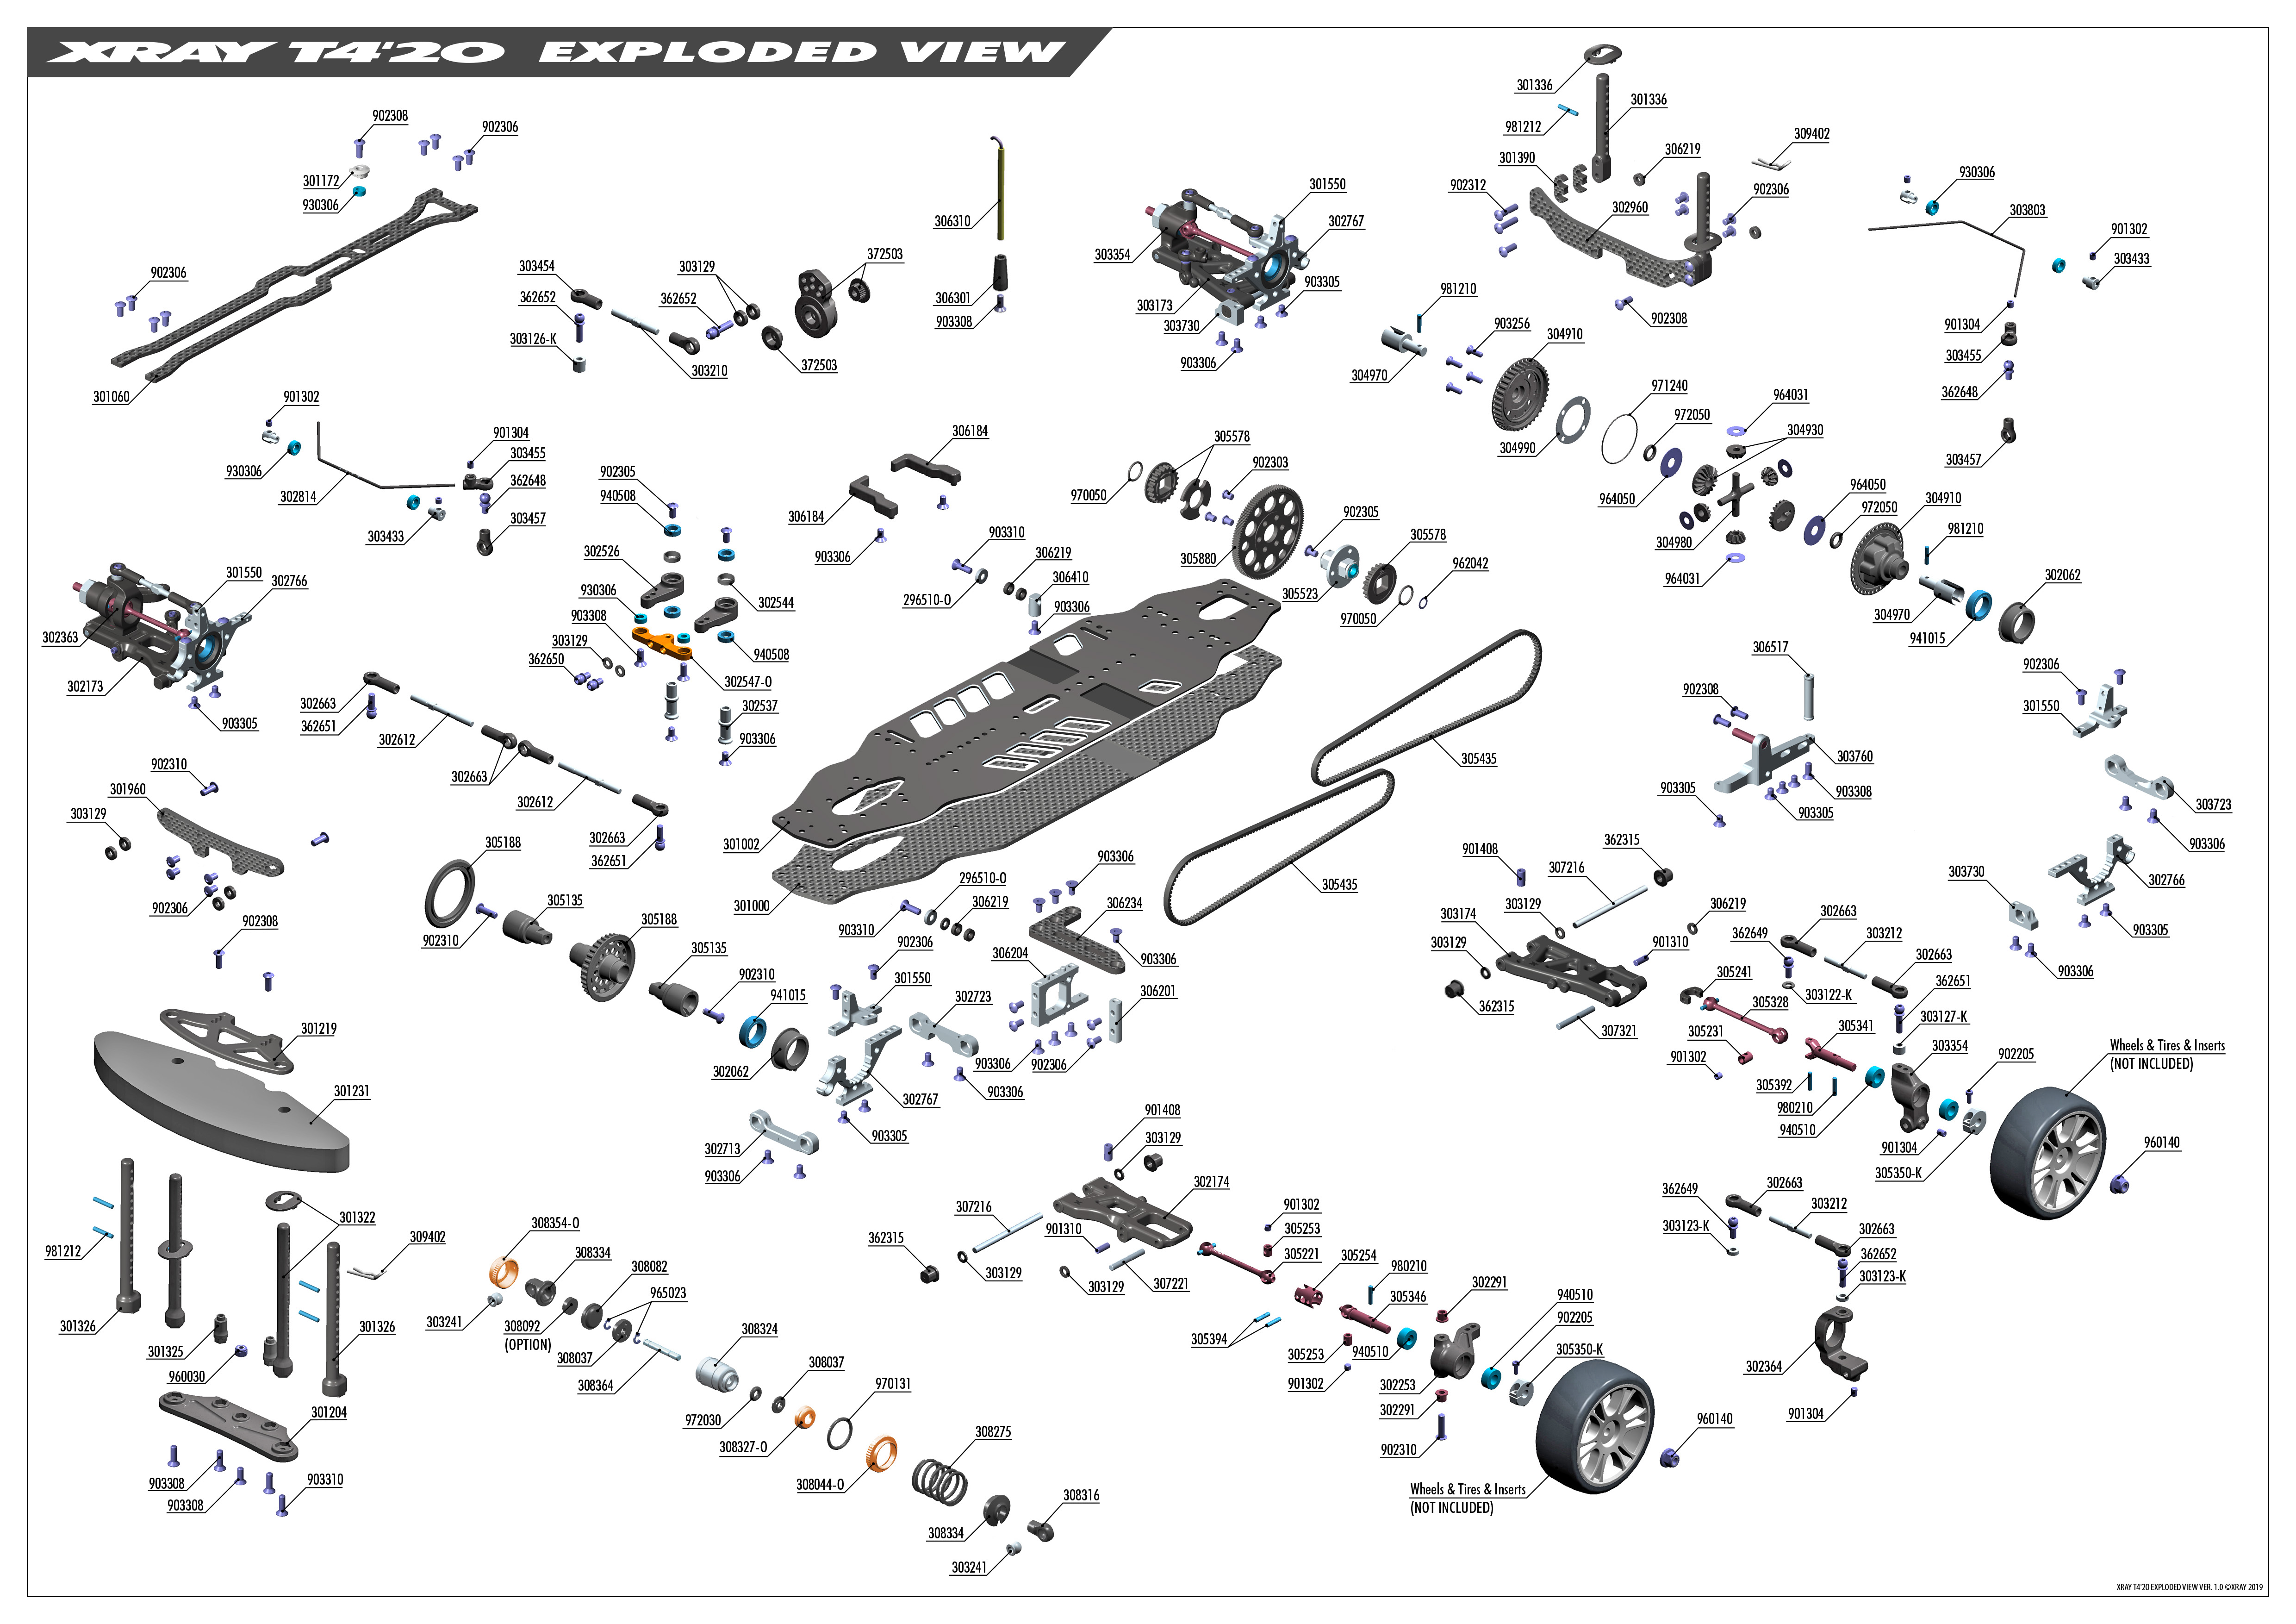 t4_2020_exploded_view